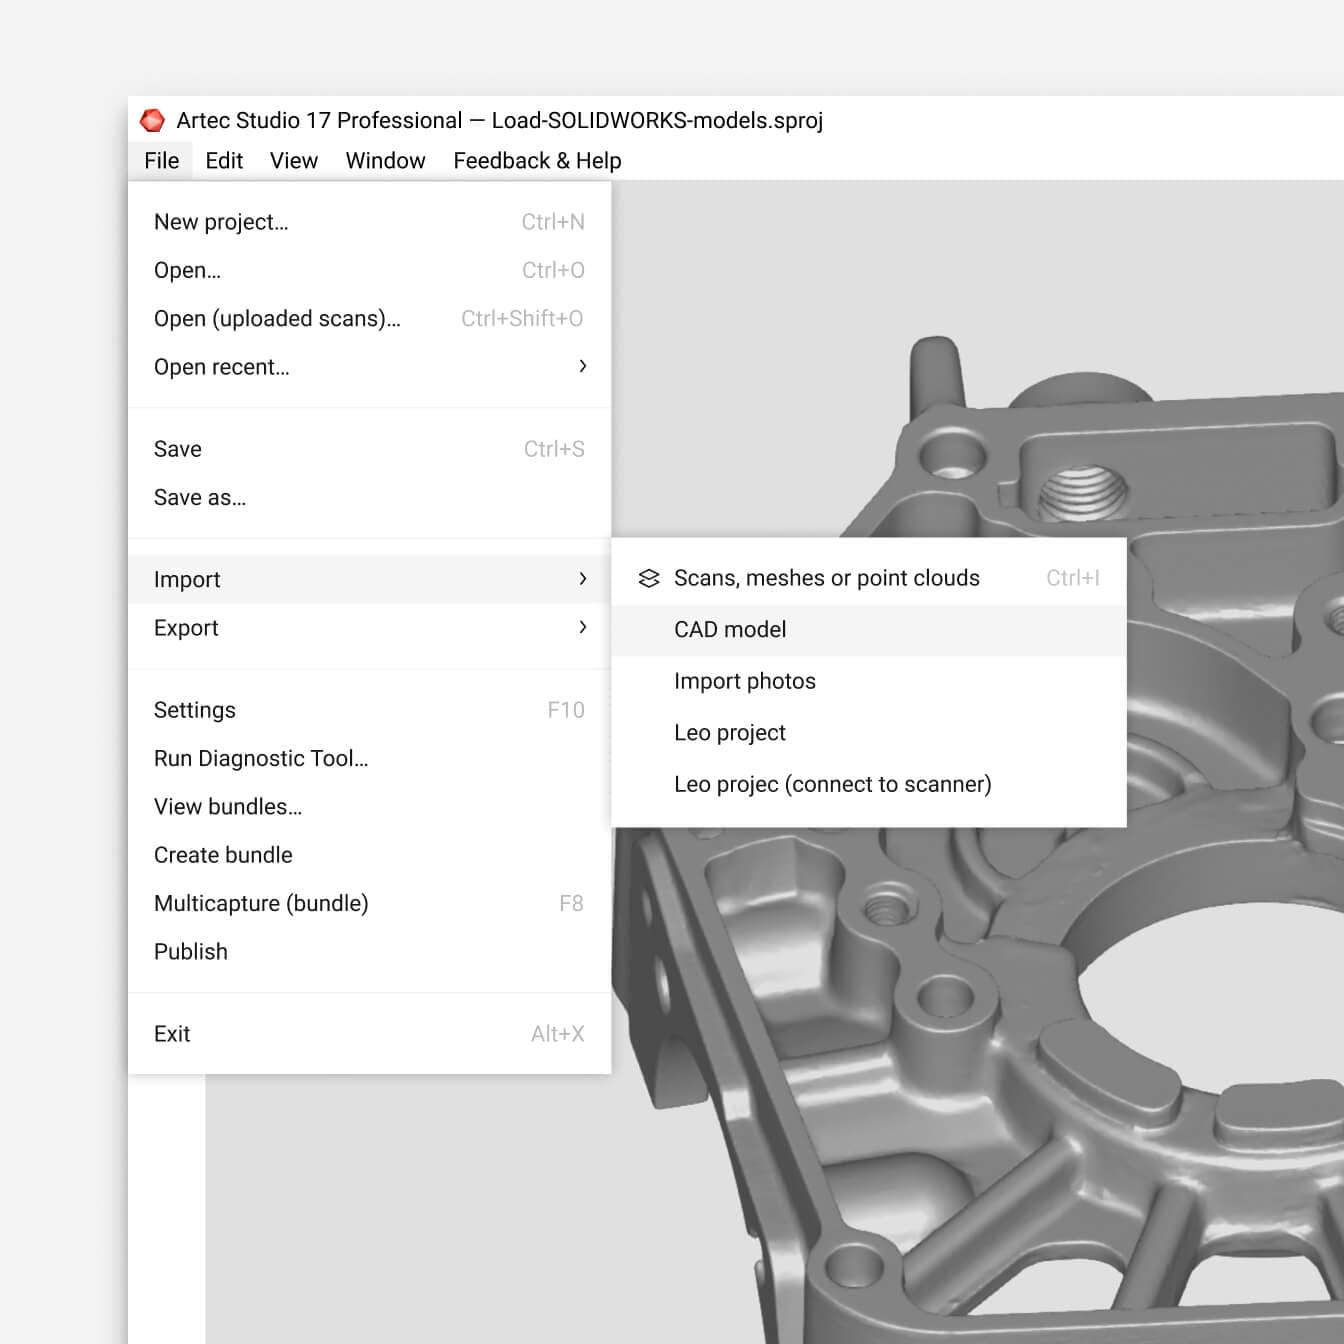 Load SOLIDWORKS models in Artec Studio for direct comparison with your mesh